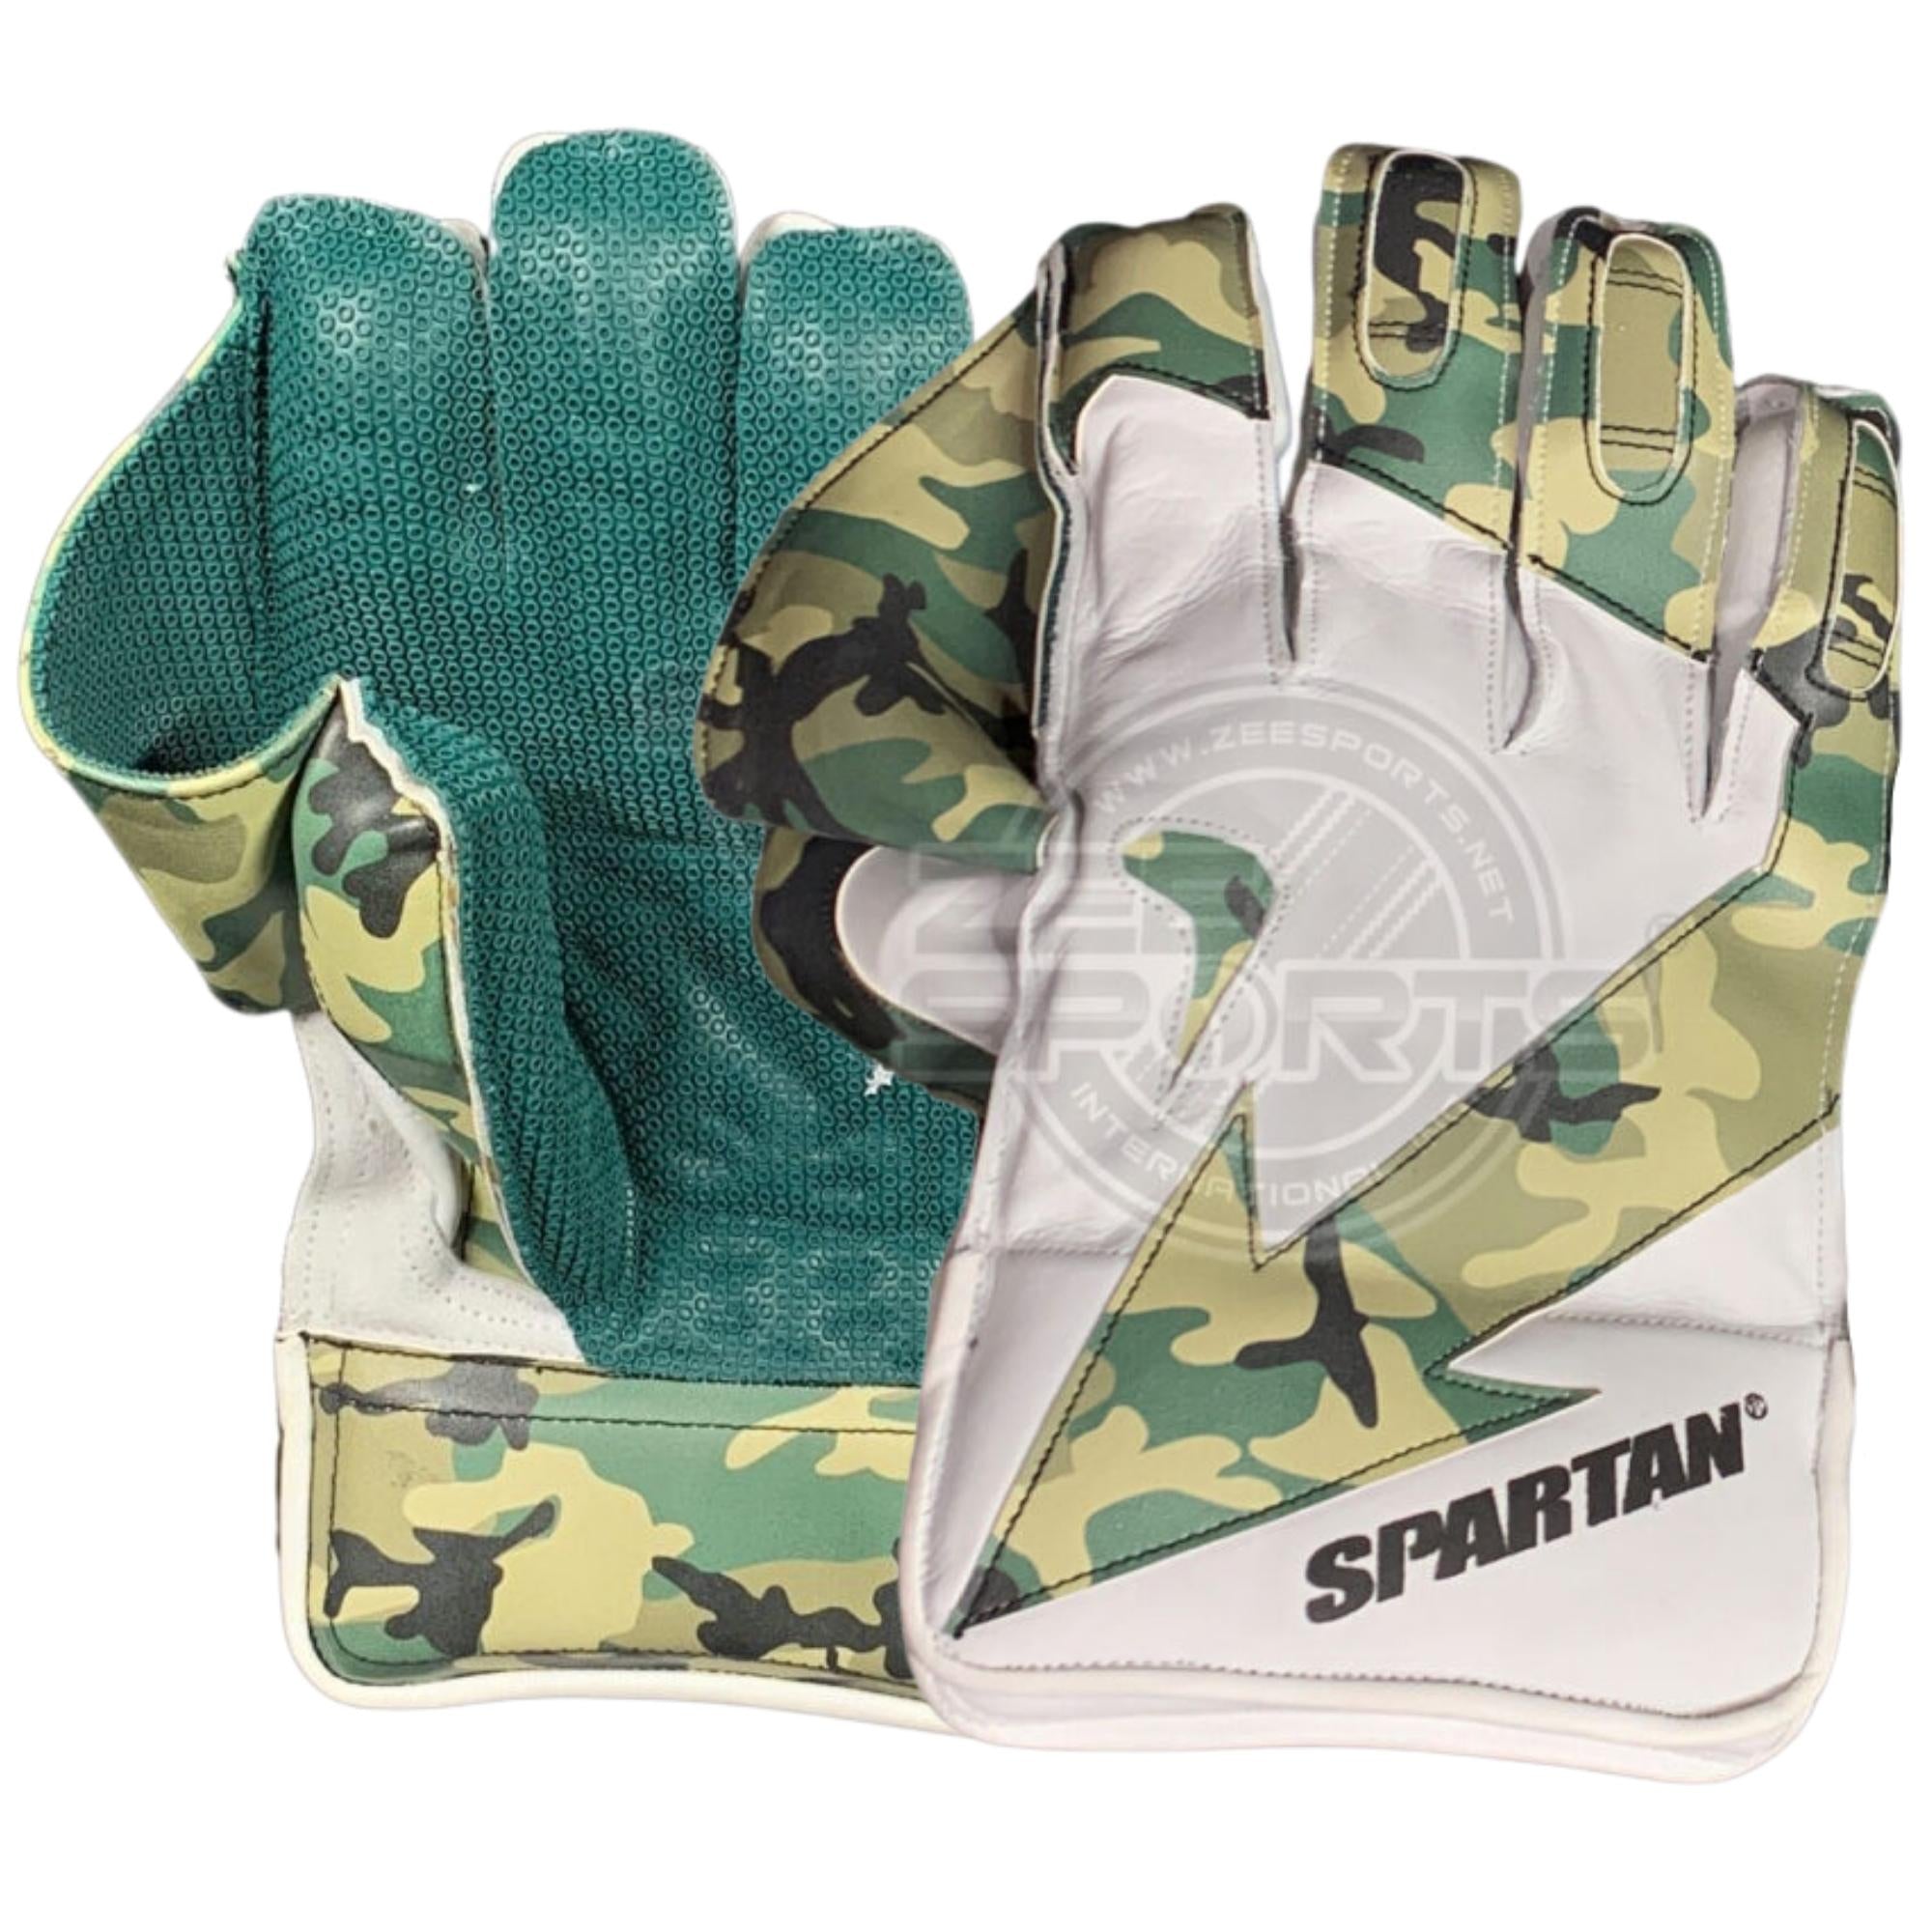 Spartan MS Dhoni Limited Edition Wicket Keeping Player's Grade Gloves